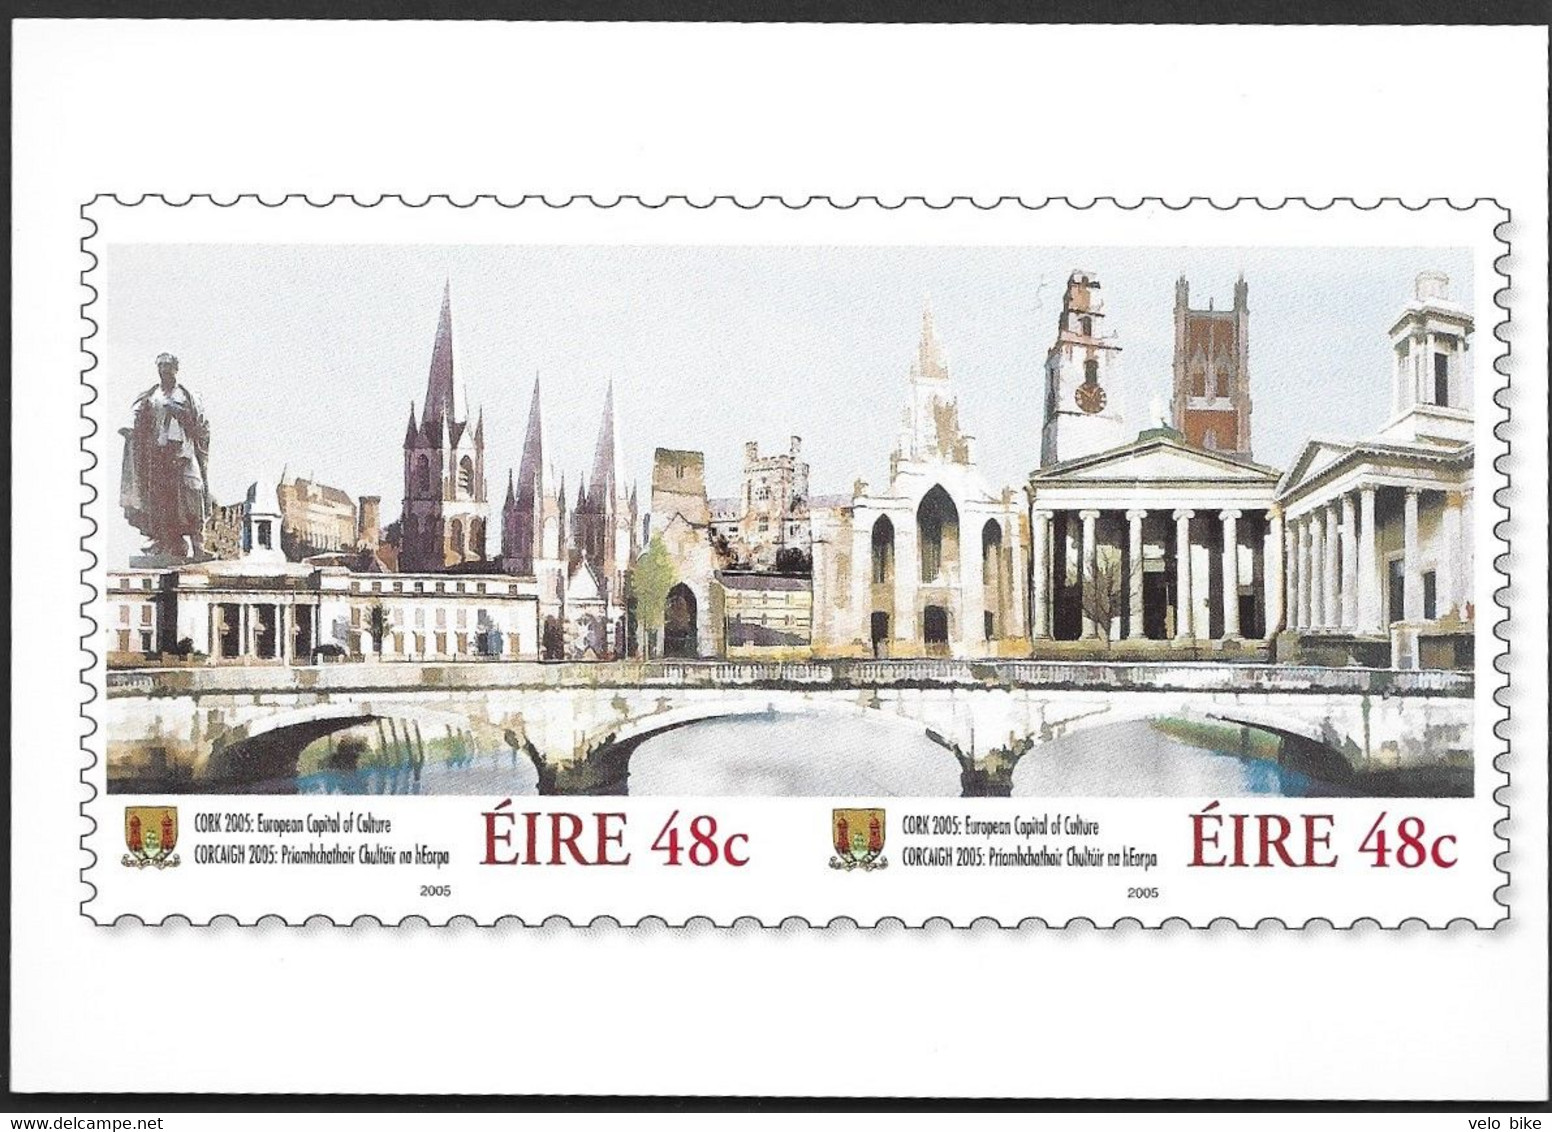 Eire Ireland Postal Stationery Postage Paid Cork 2005 Art Statue Bridge Church Capitol Of Culture Prioritaire Airmail - Enteros Postales